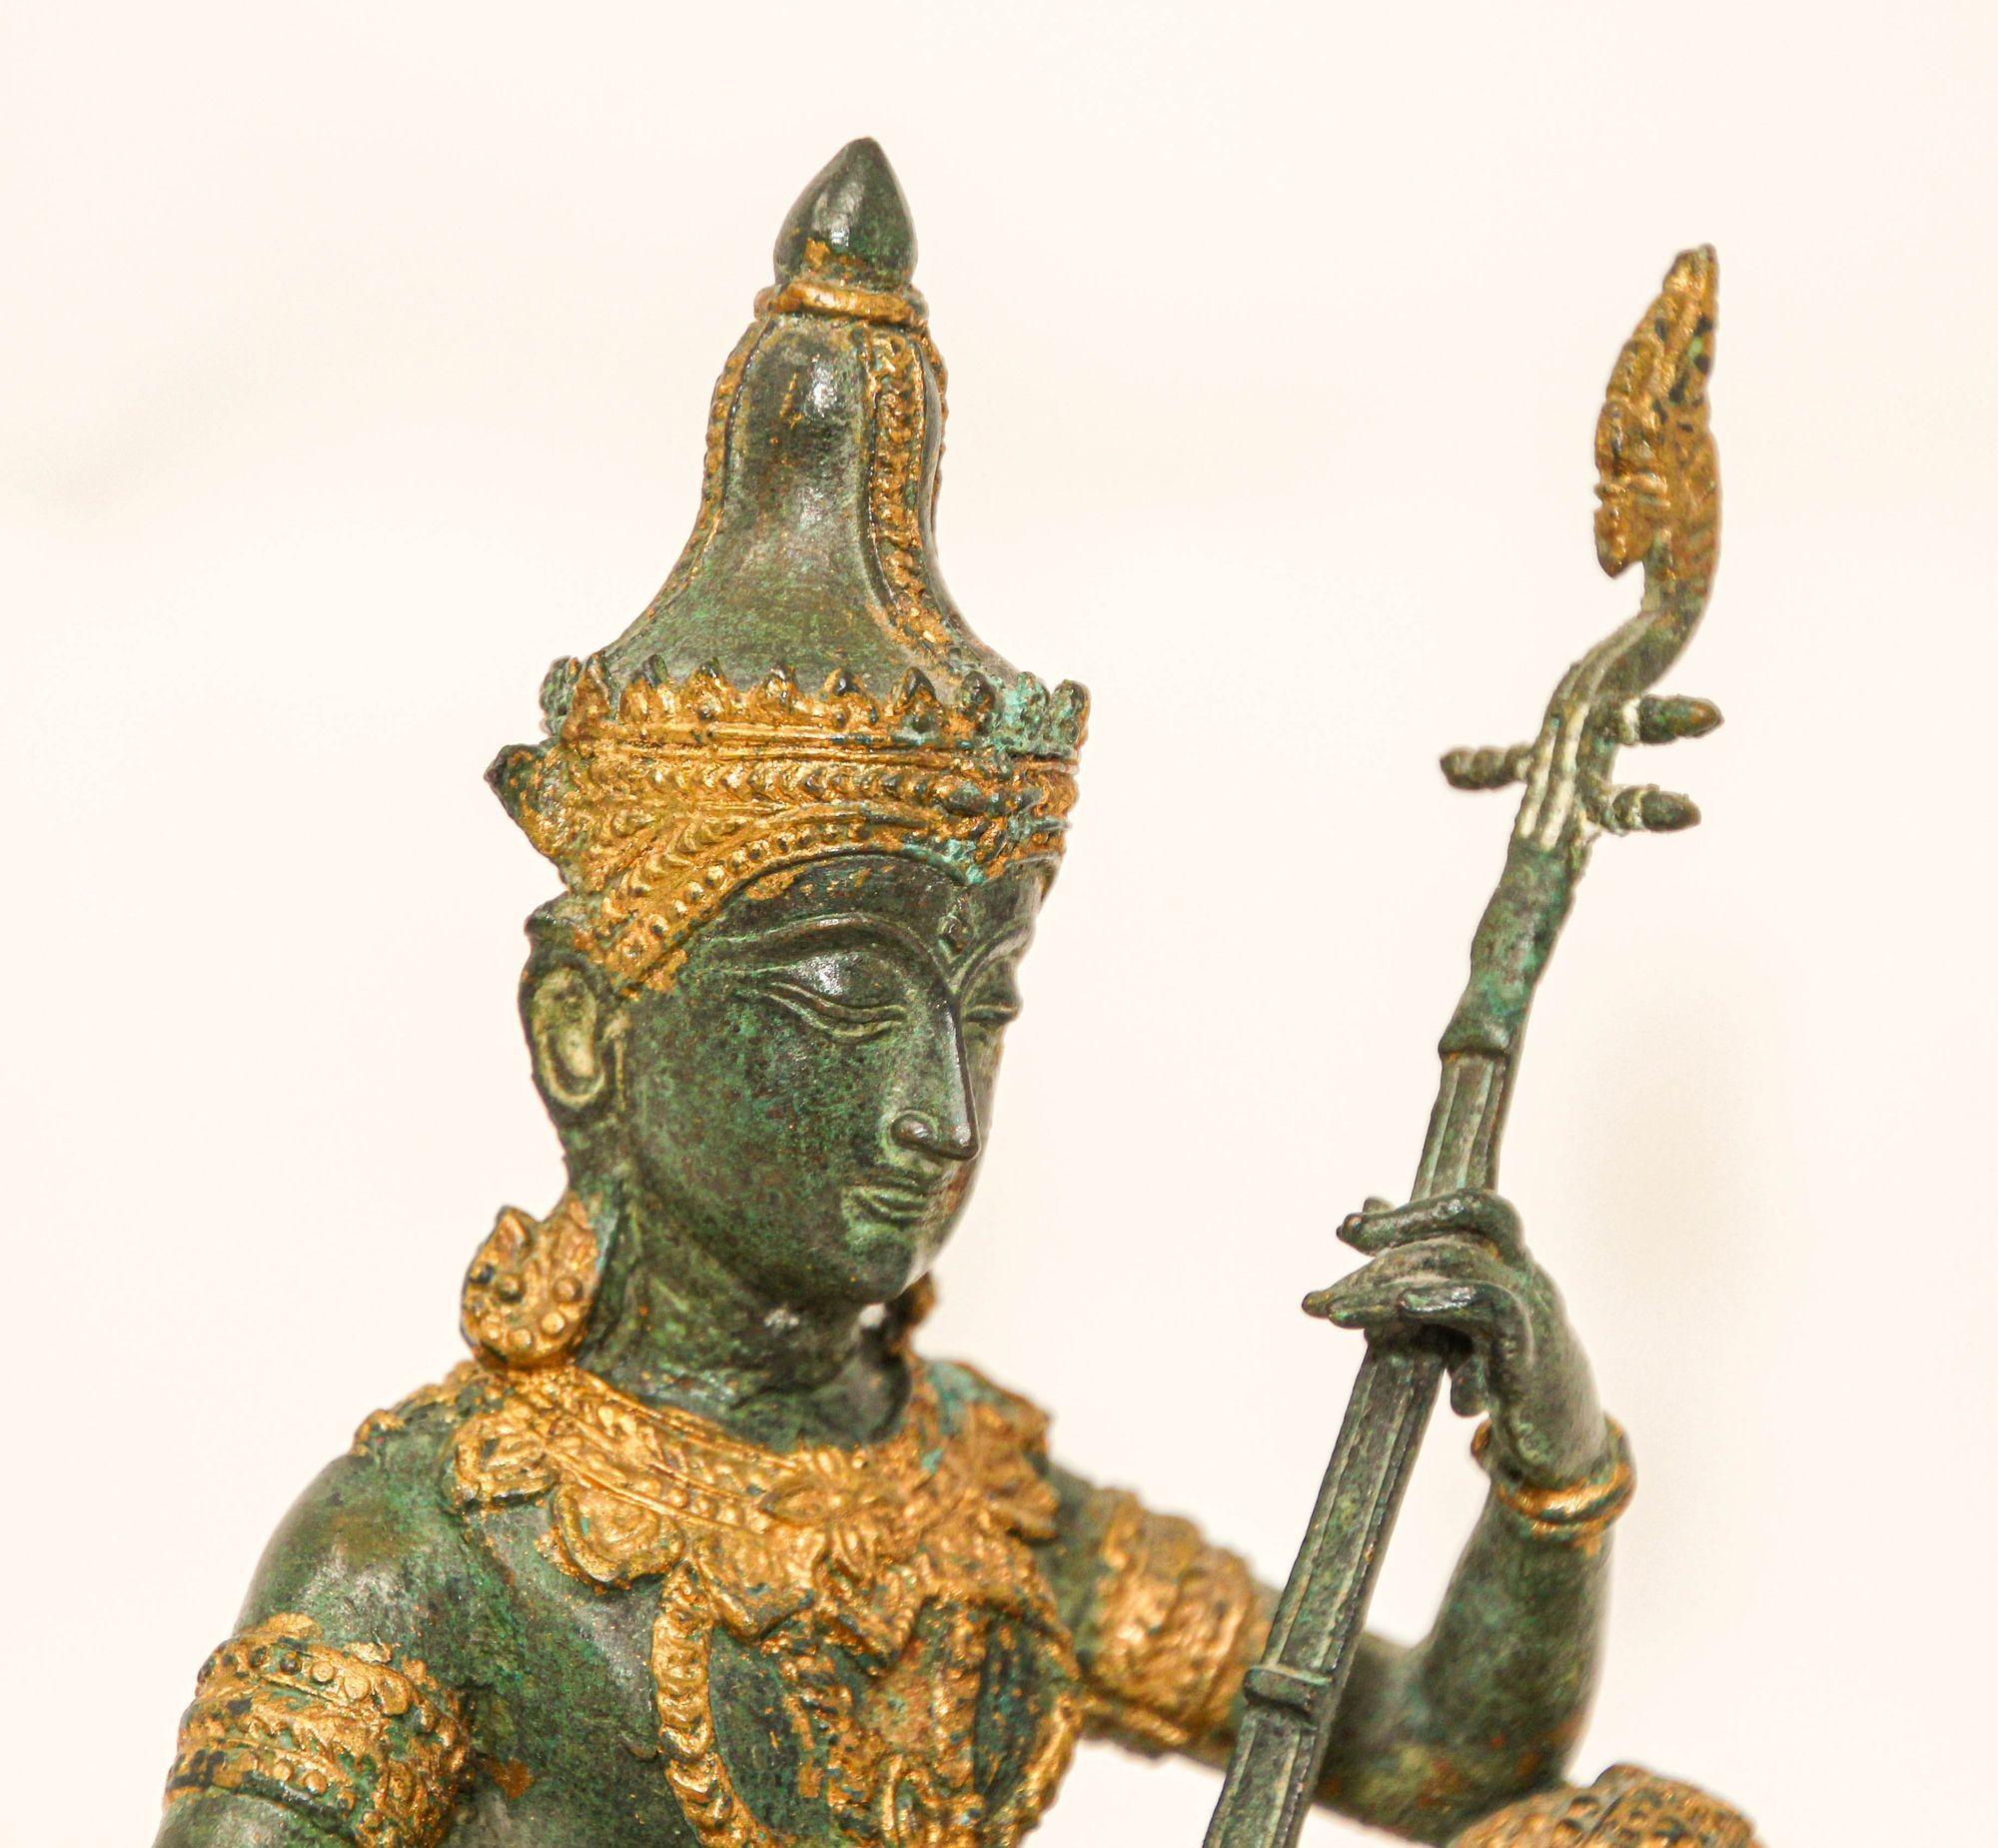 Vintage Gilt Bronze Asian Sculpture of a Thai Deity Prince Playing Music 1950s For Sale 2